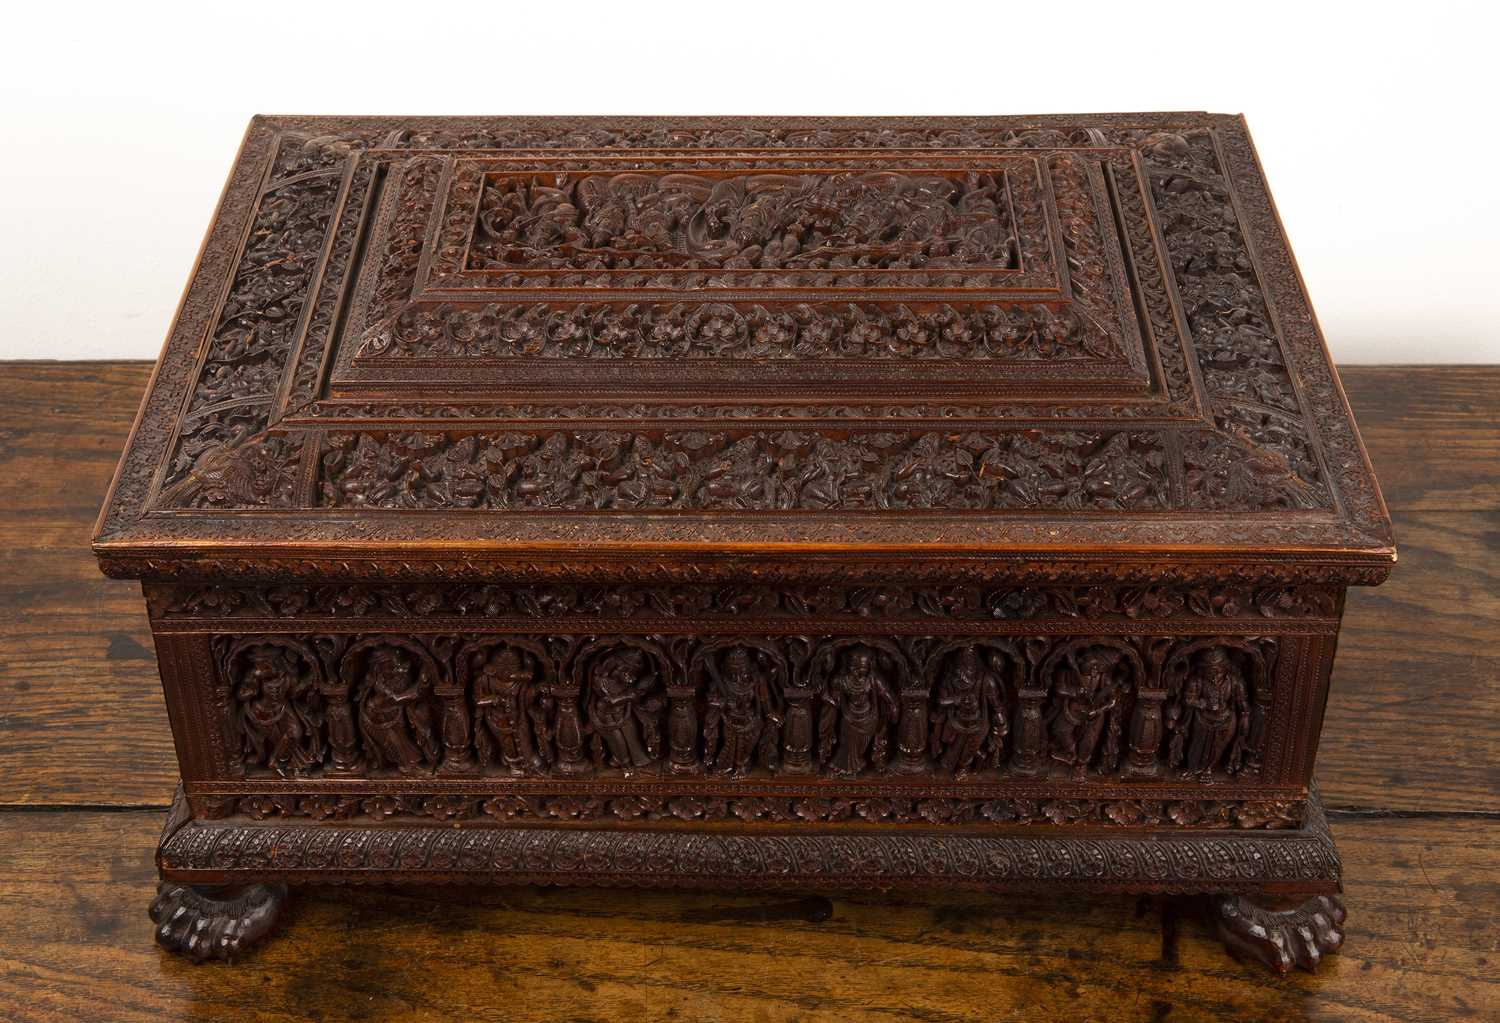 Sandalwood jewel box Indian, late 19th/20th Century, with extensive carved decoration throughout and - Image 6 of 7